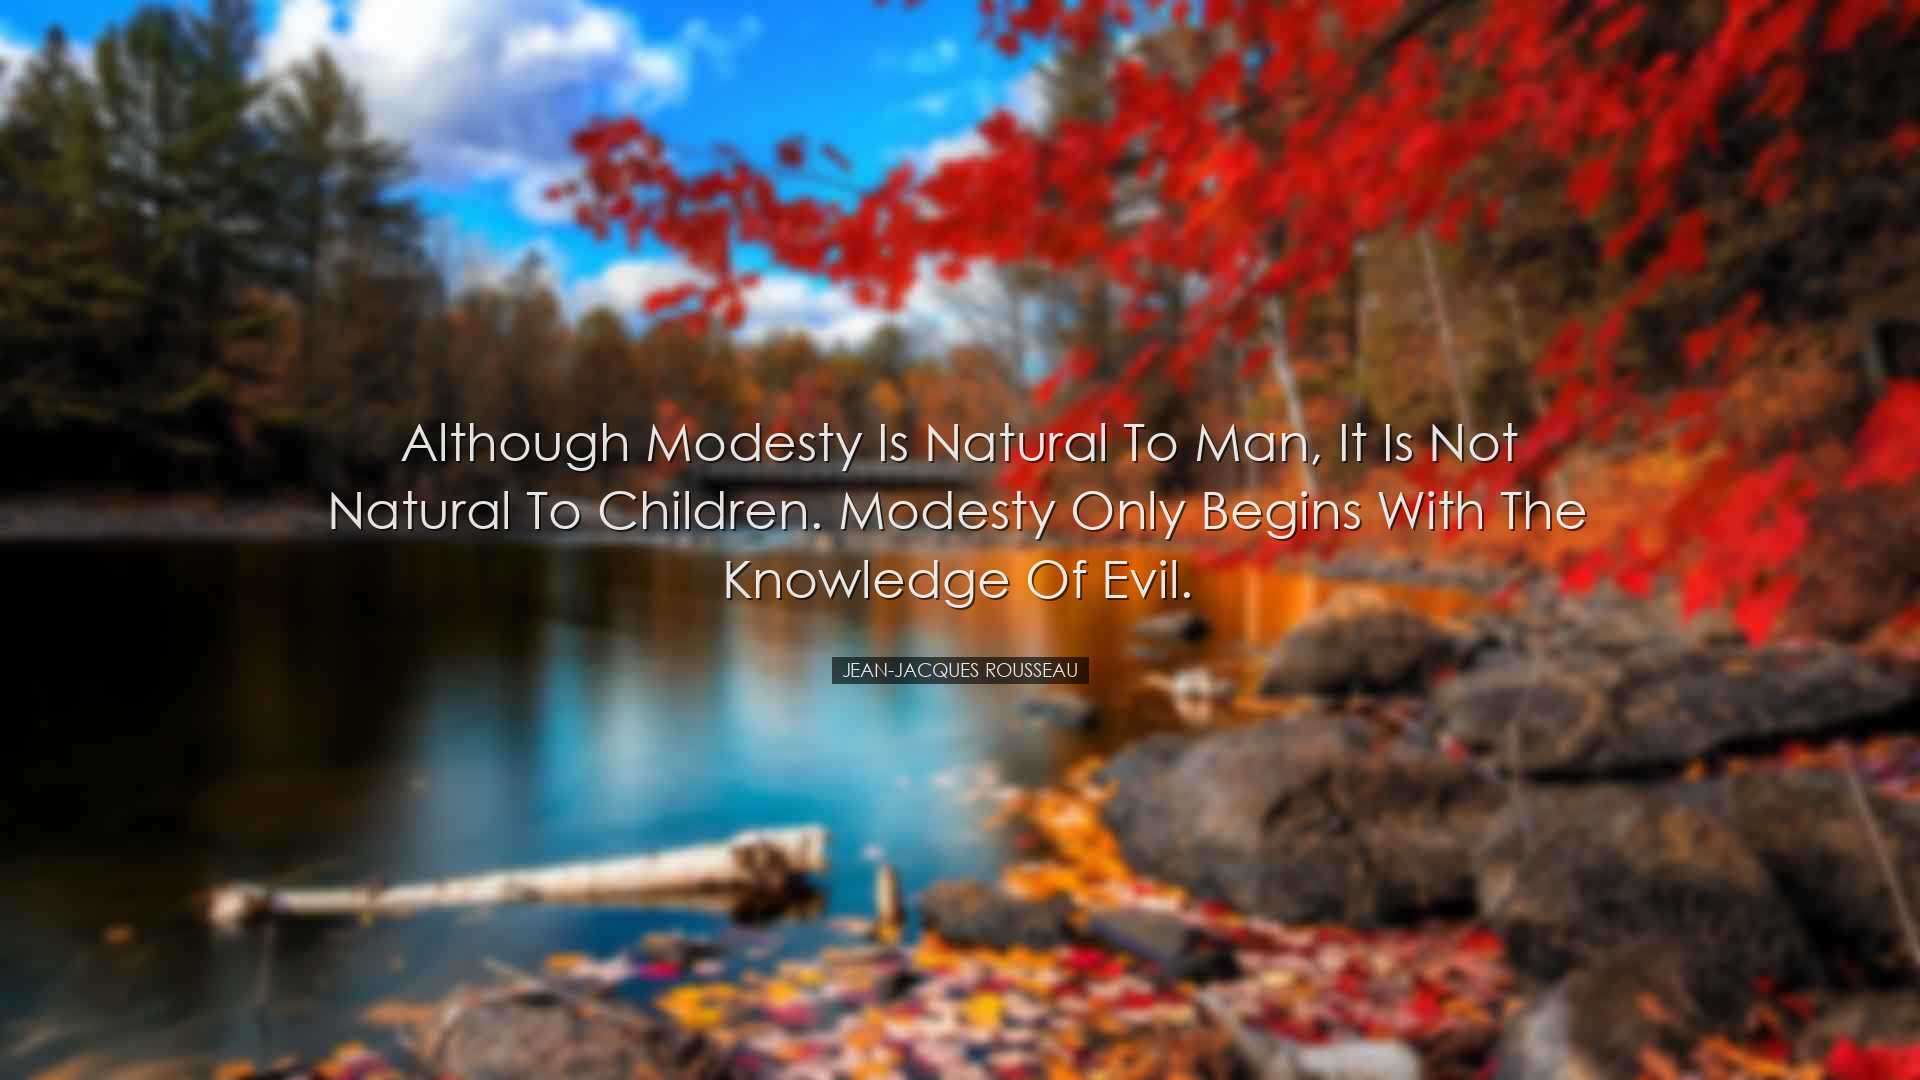 Although modesty is natural to man, it is not natural to children.